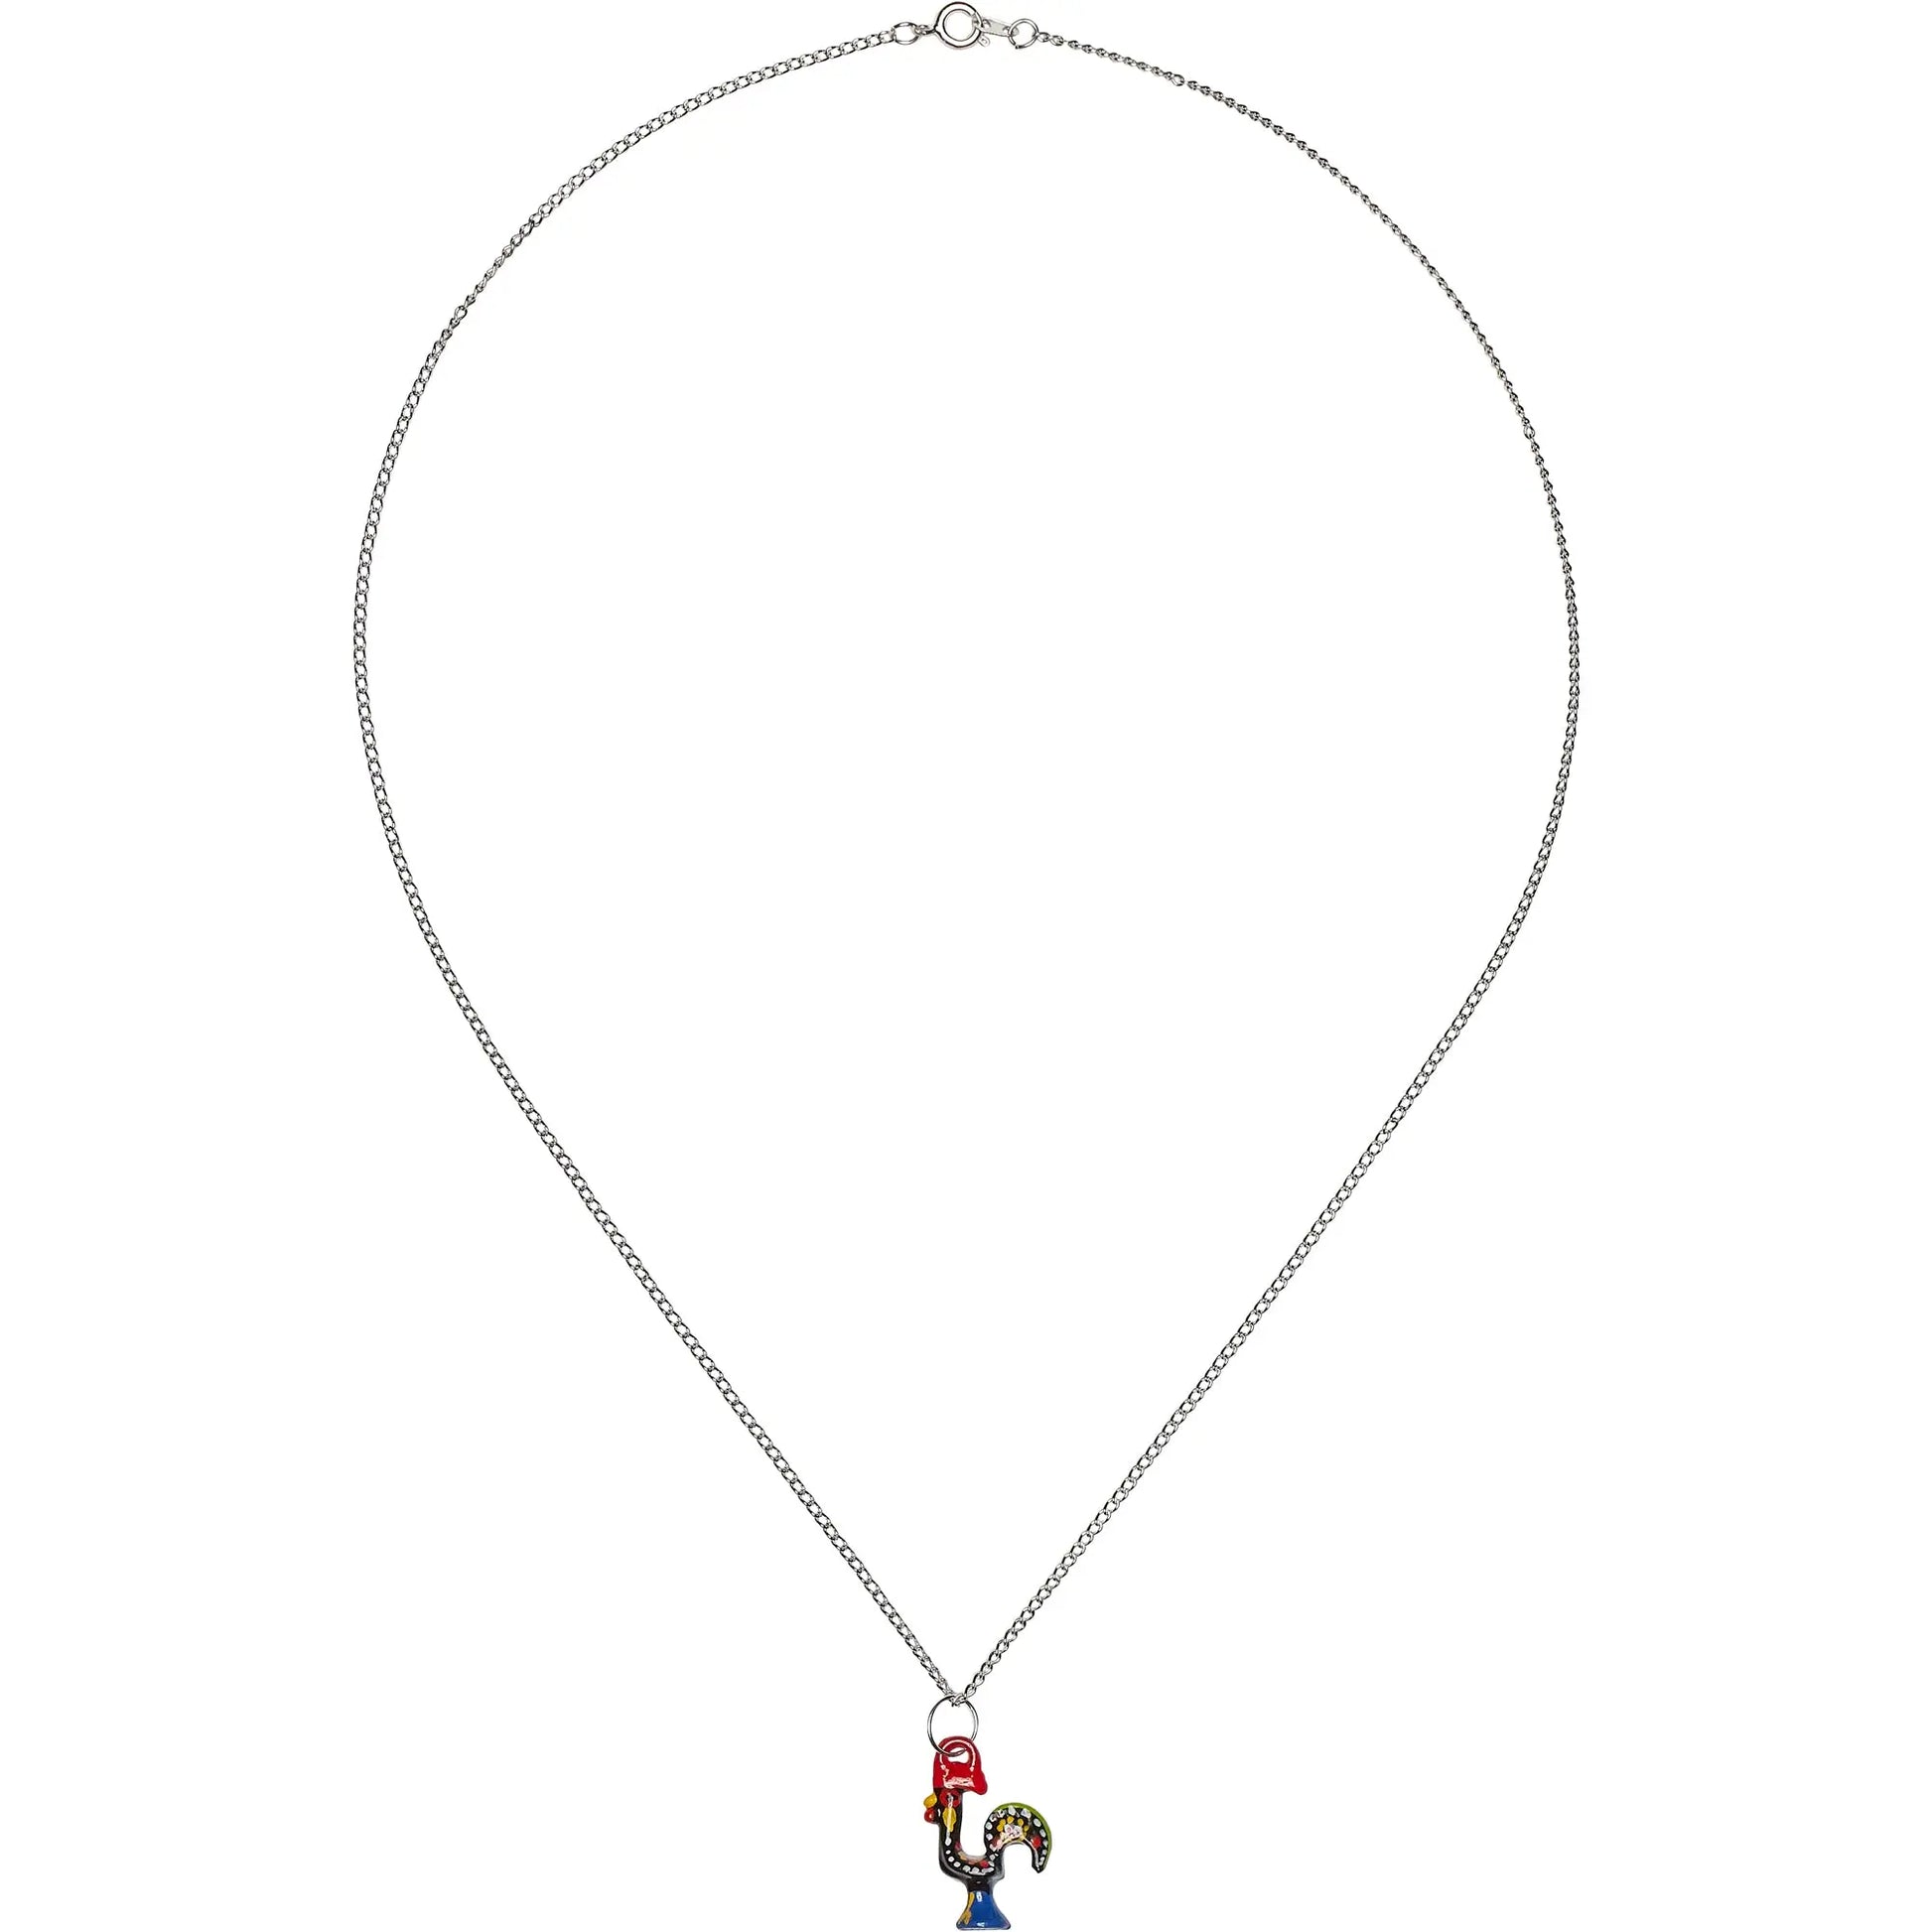 Barcelos Rooster Necklace - Rooster Camisa